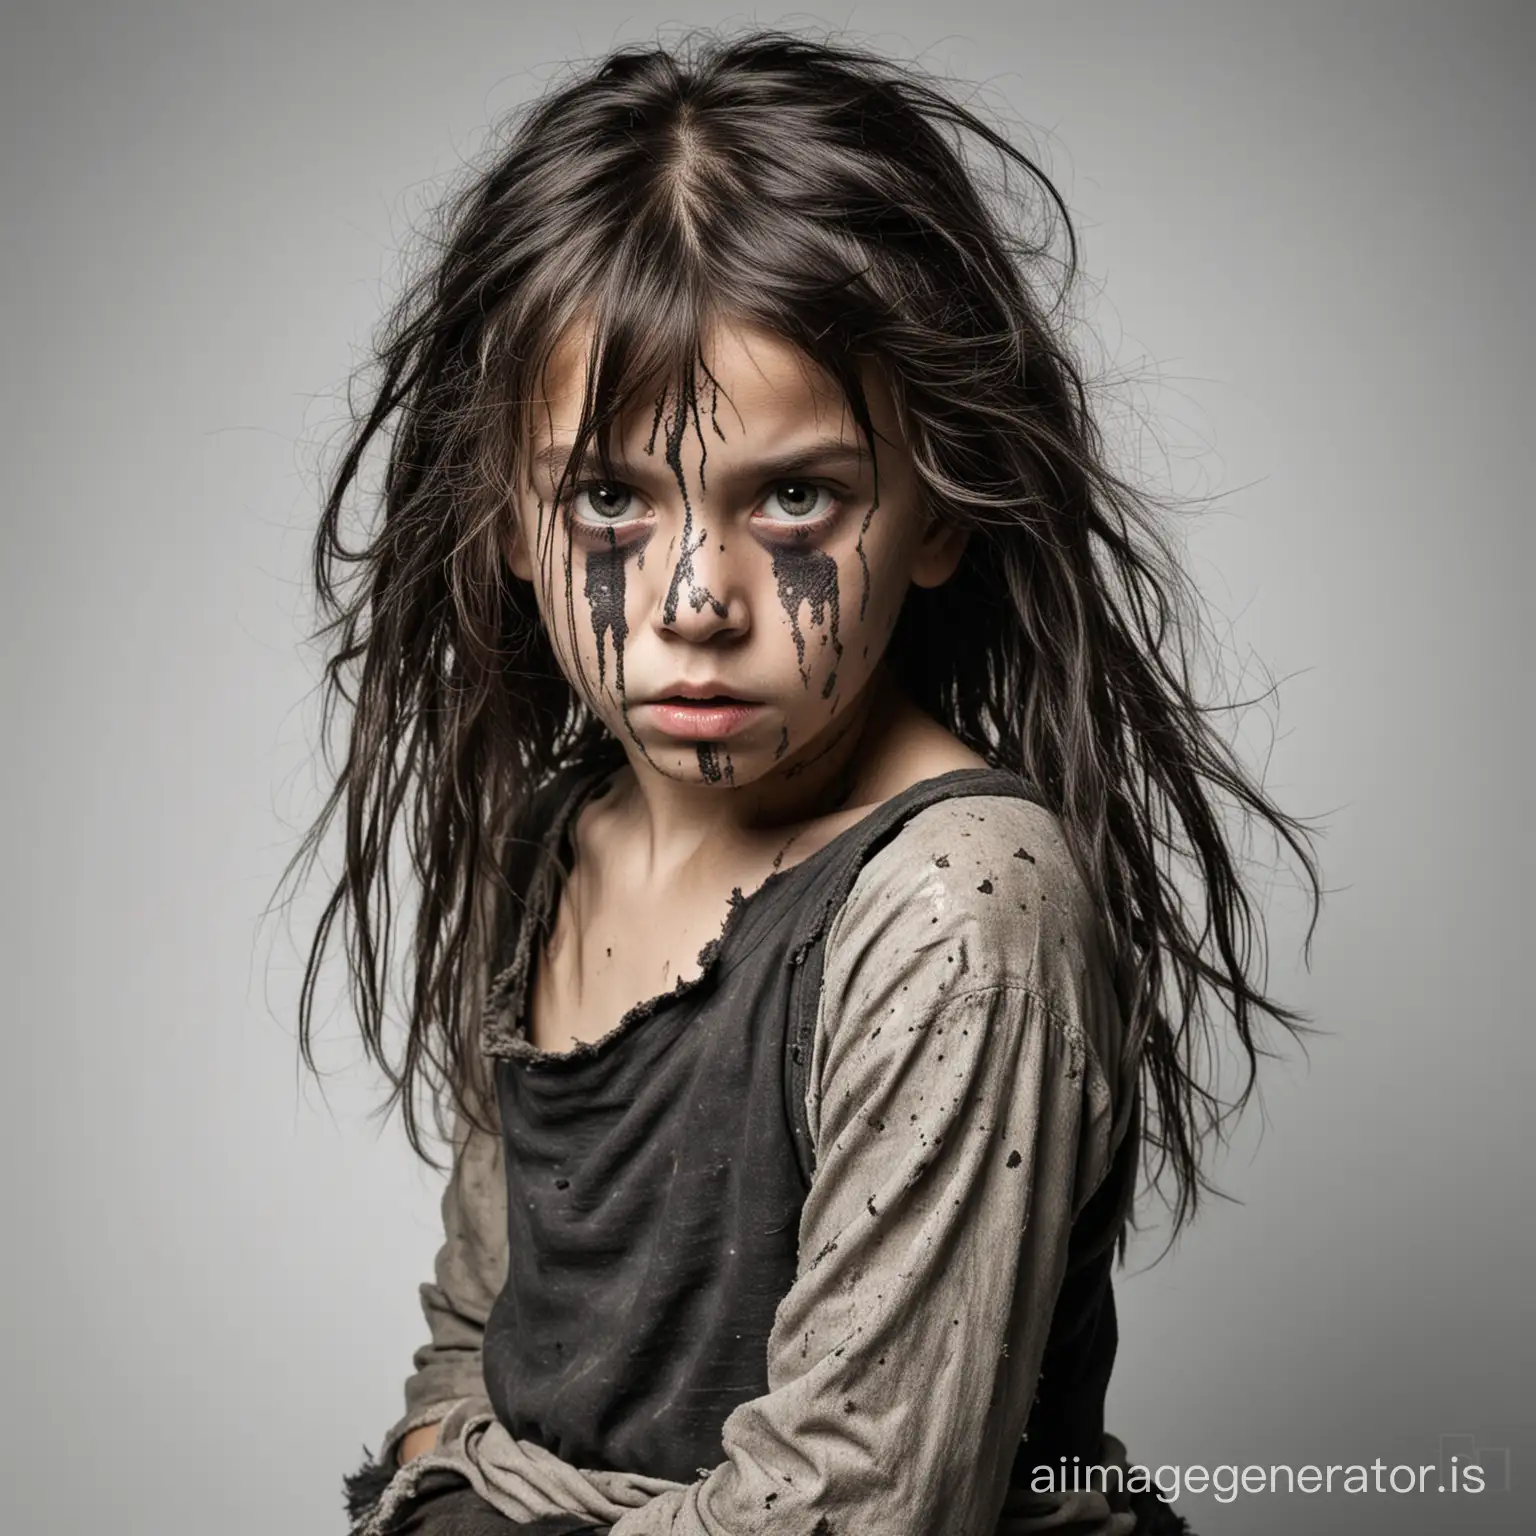 Medieval-Wild-Child-Sinister-Figure-in-Tattered-Garb-on-White-Background